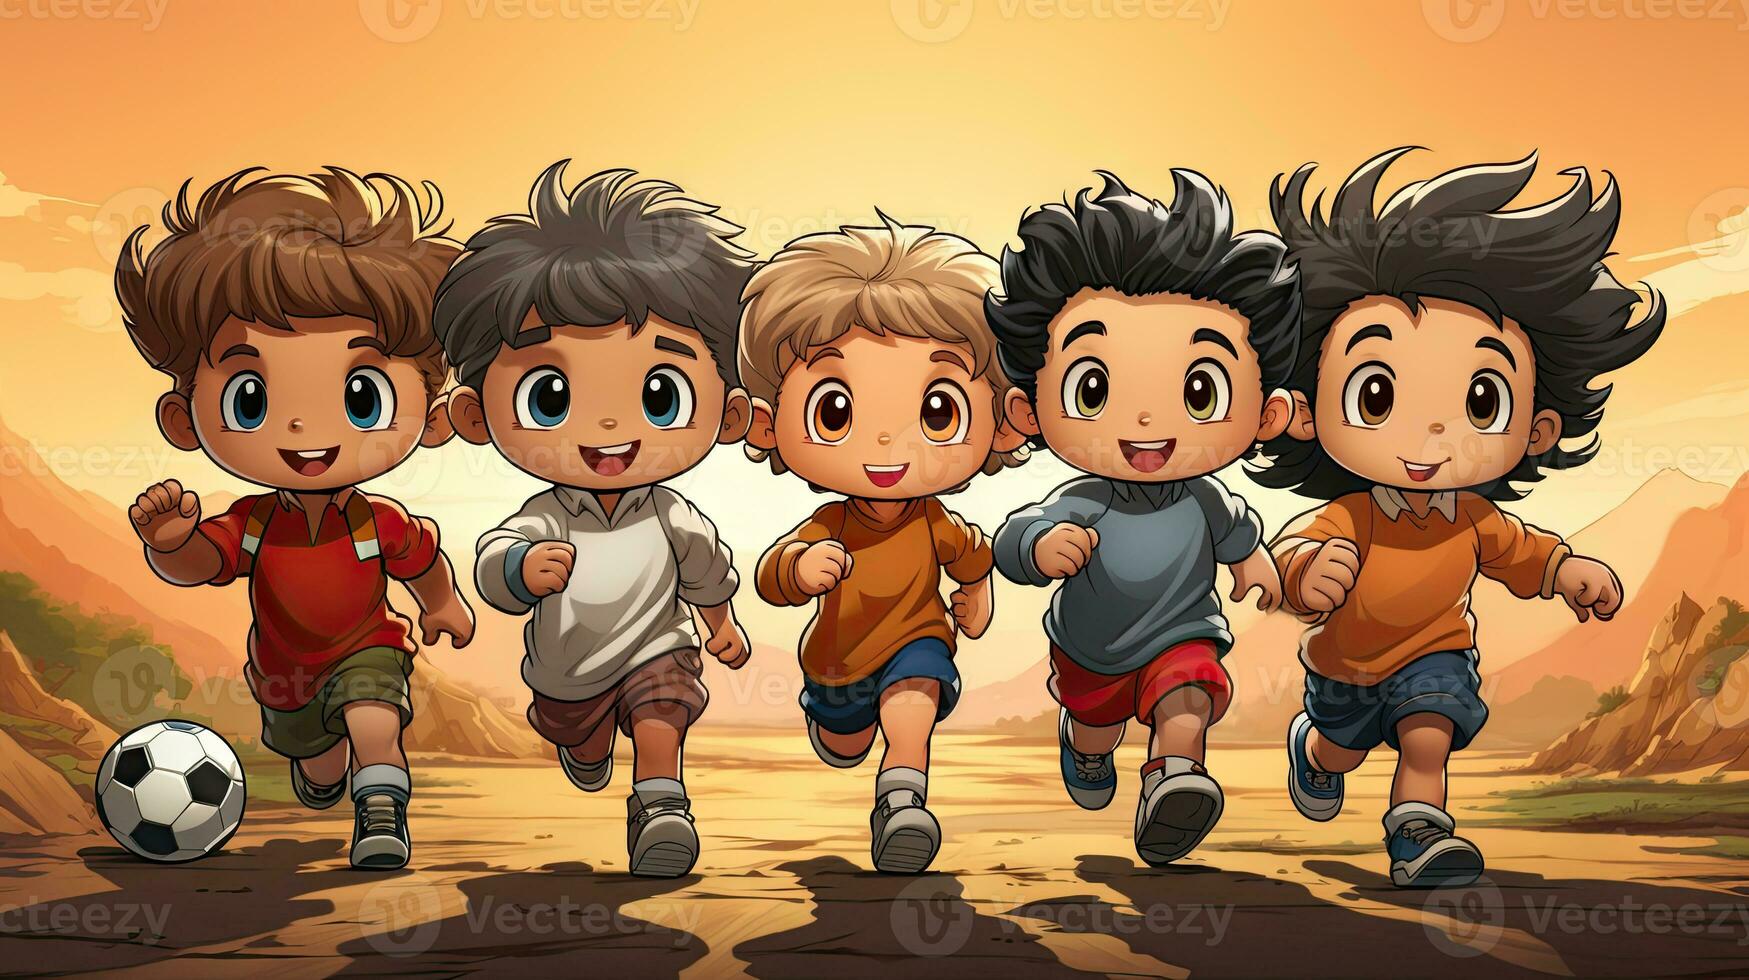 Cartoon children playing football in the field illustration. Boys play soccer. photo